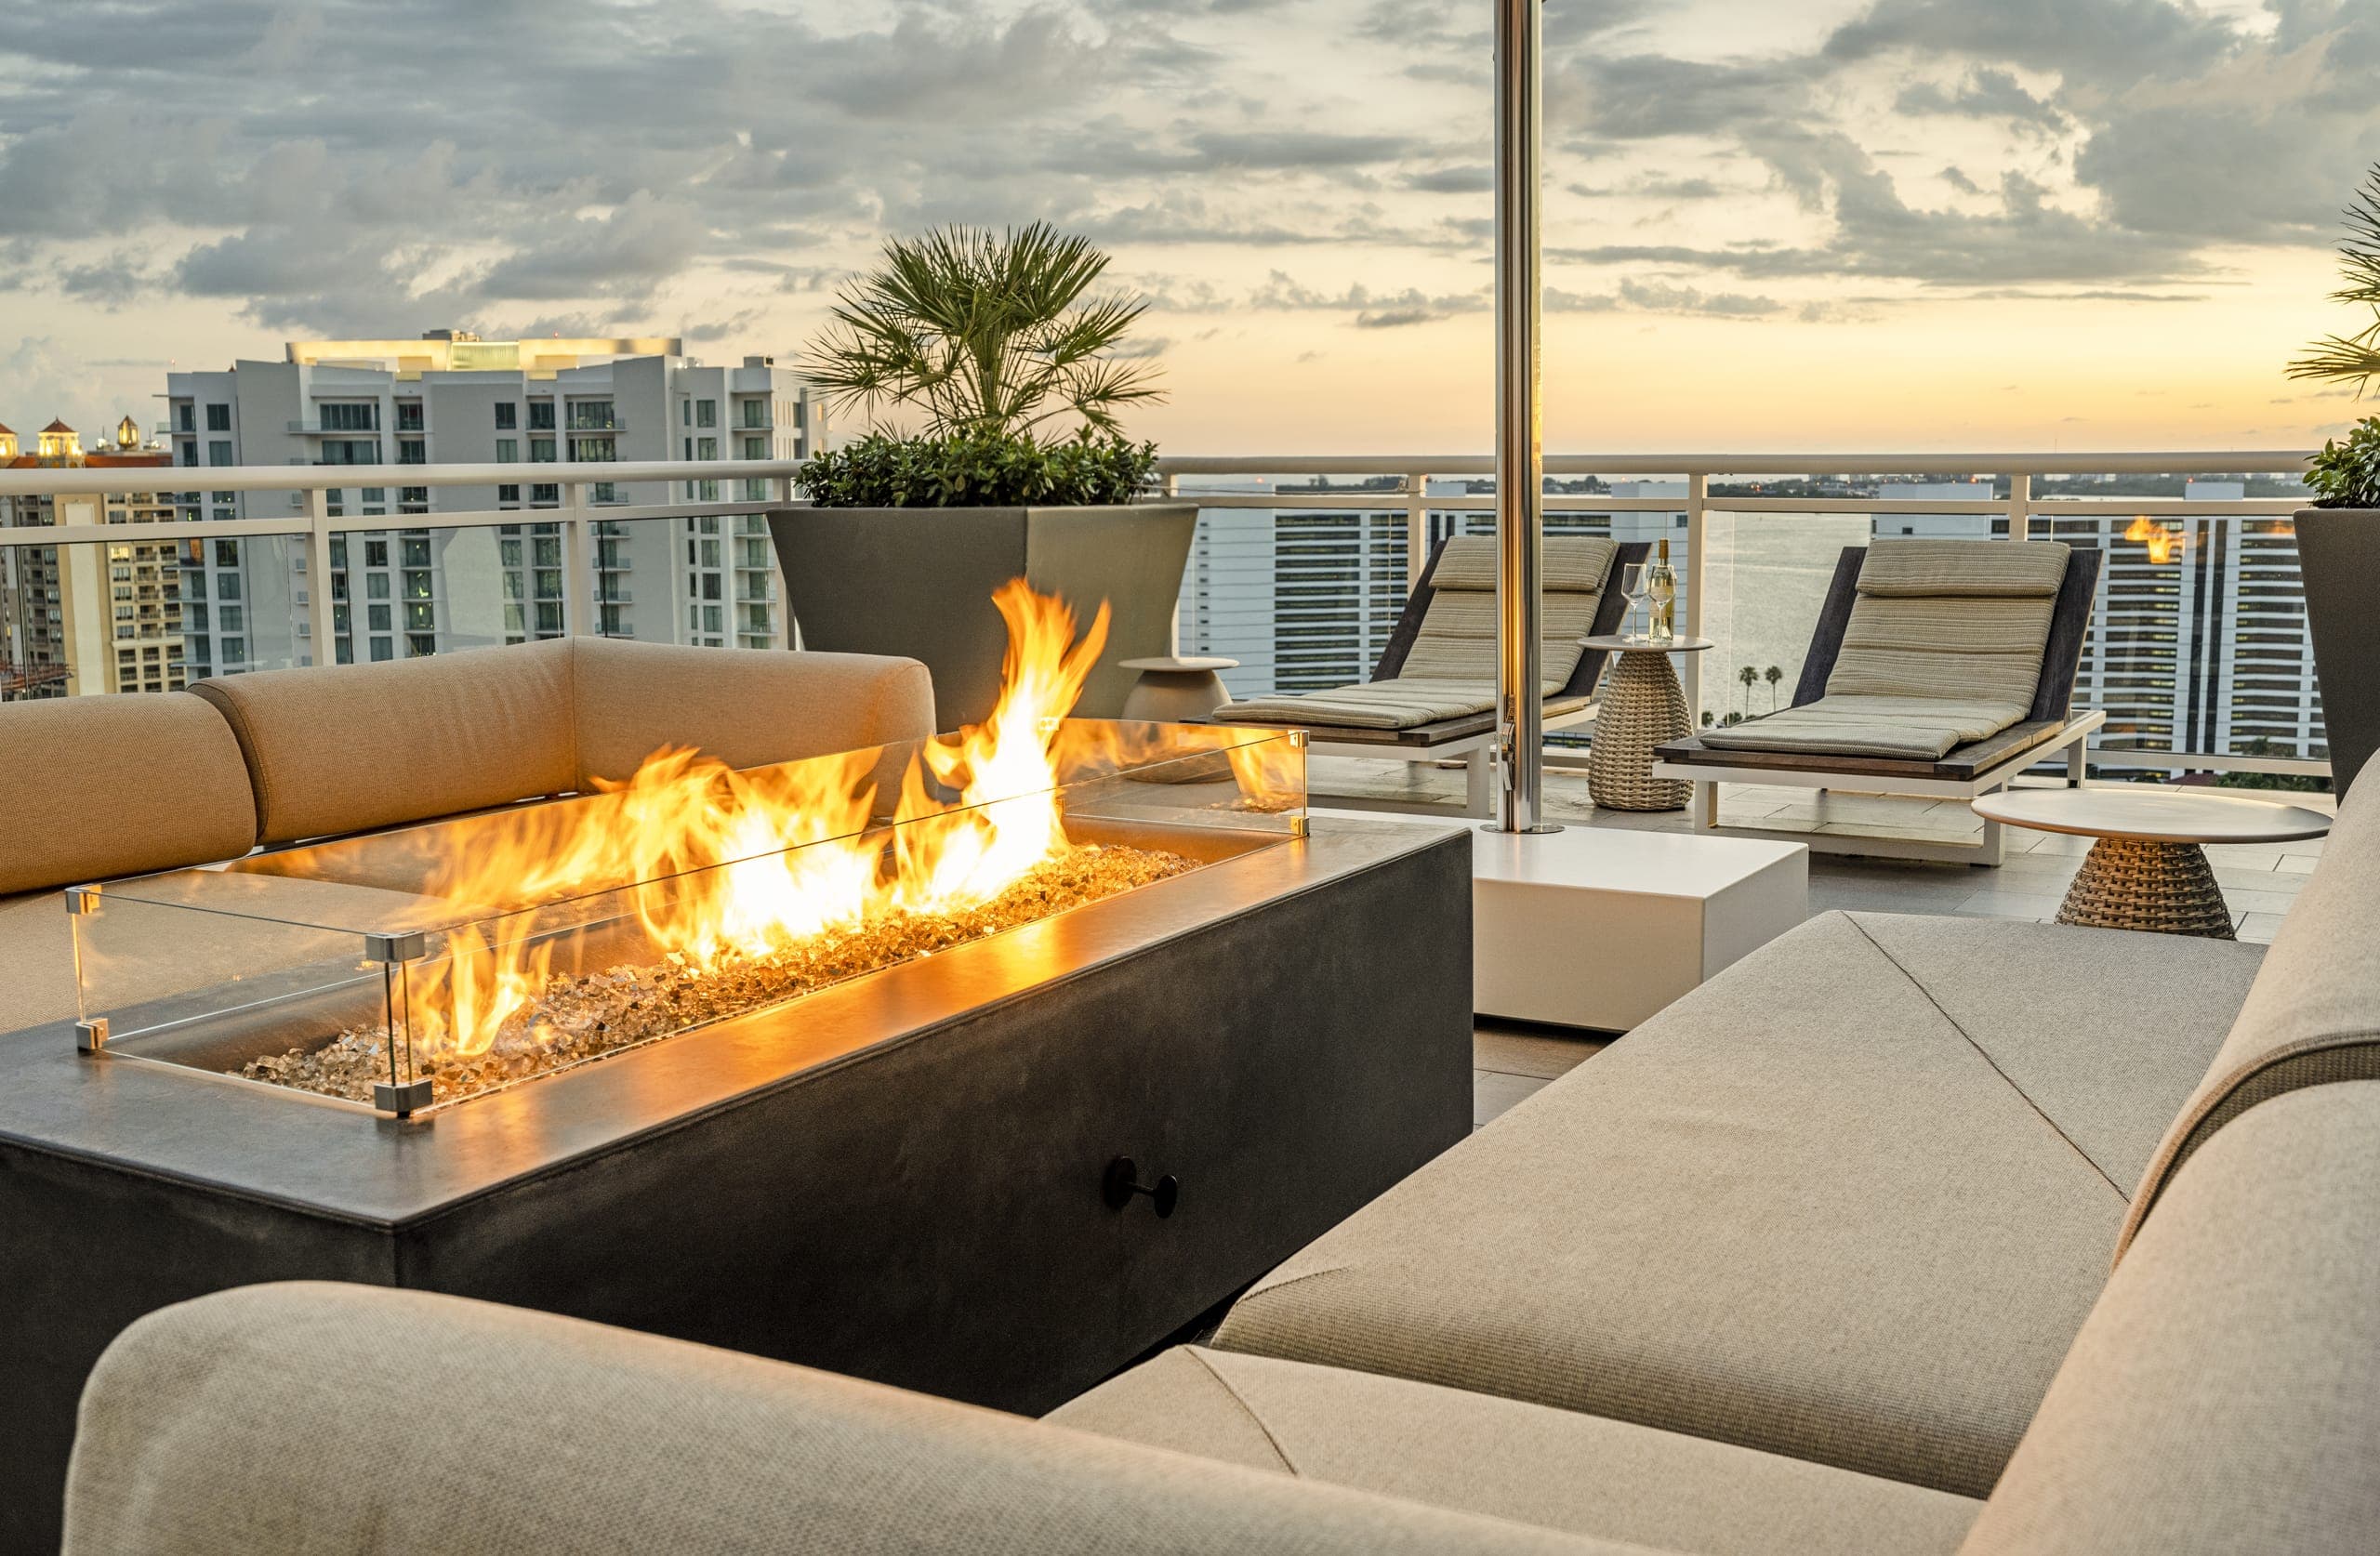 Jkl Penthouse The Blvd Fire Pit Outdoor Grey Couch